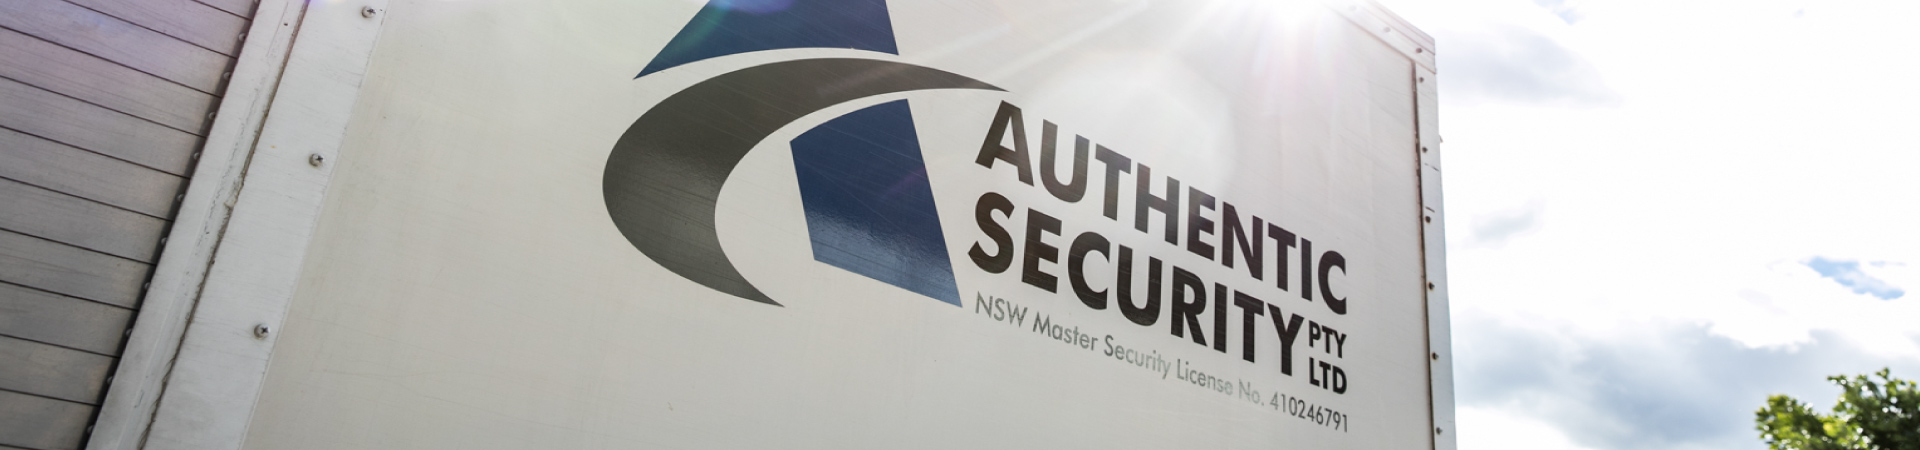 contact authentic security